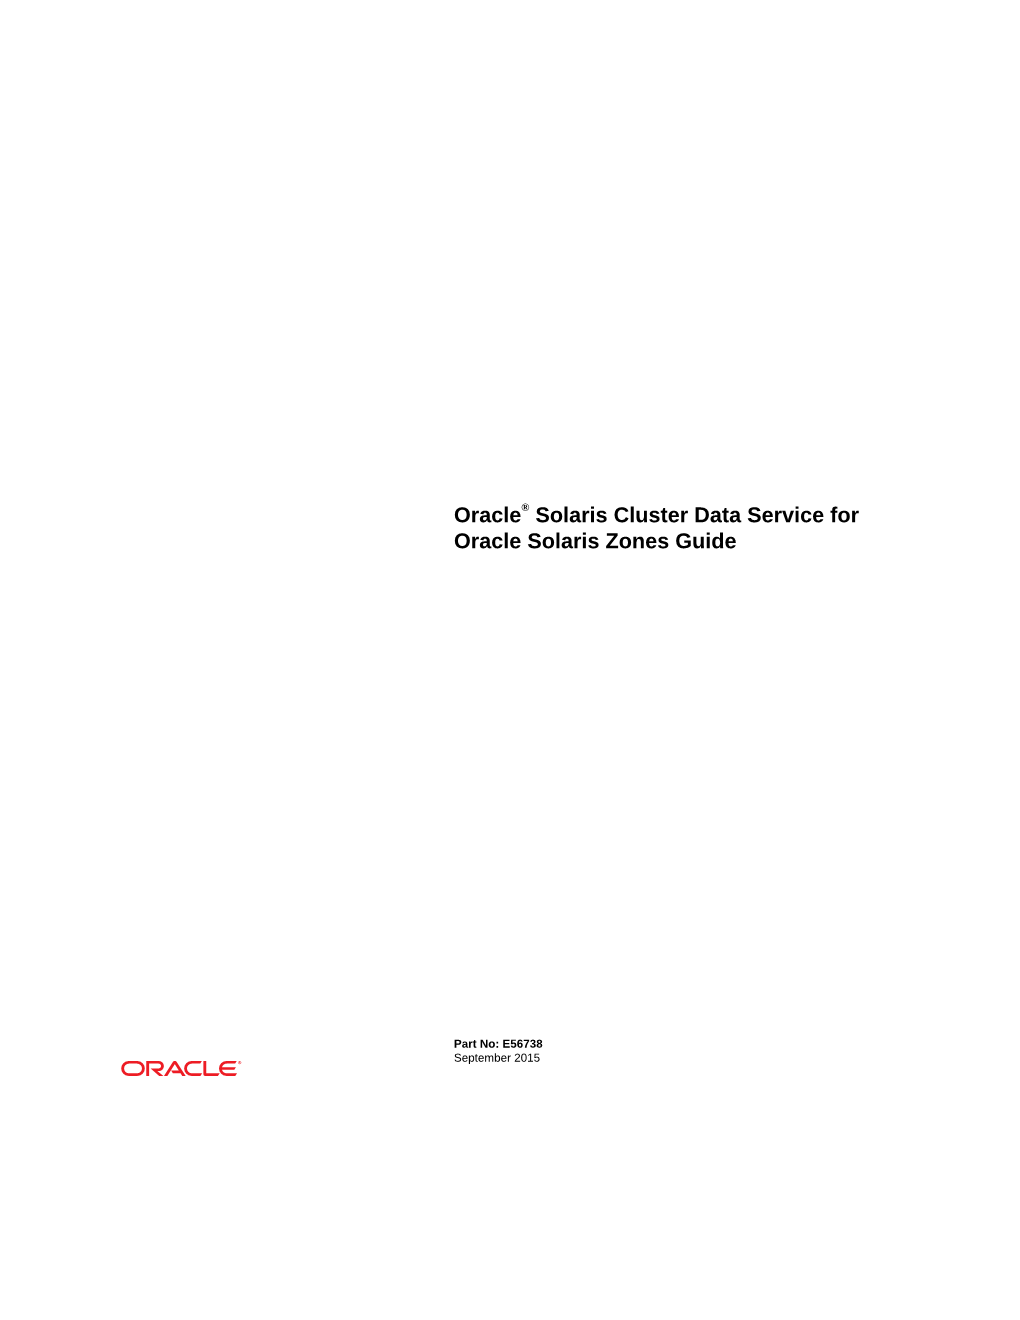 Oracle® Solaris Cluster Data Service for Oracle Solaris Zones Guide